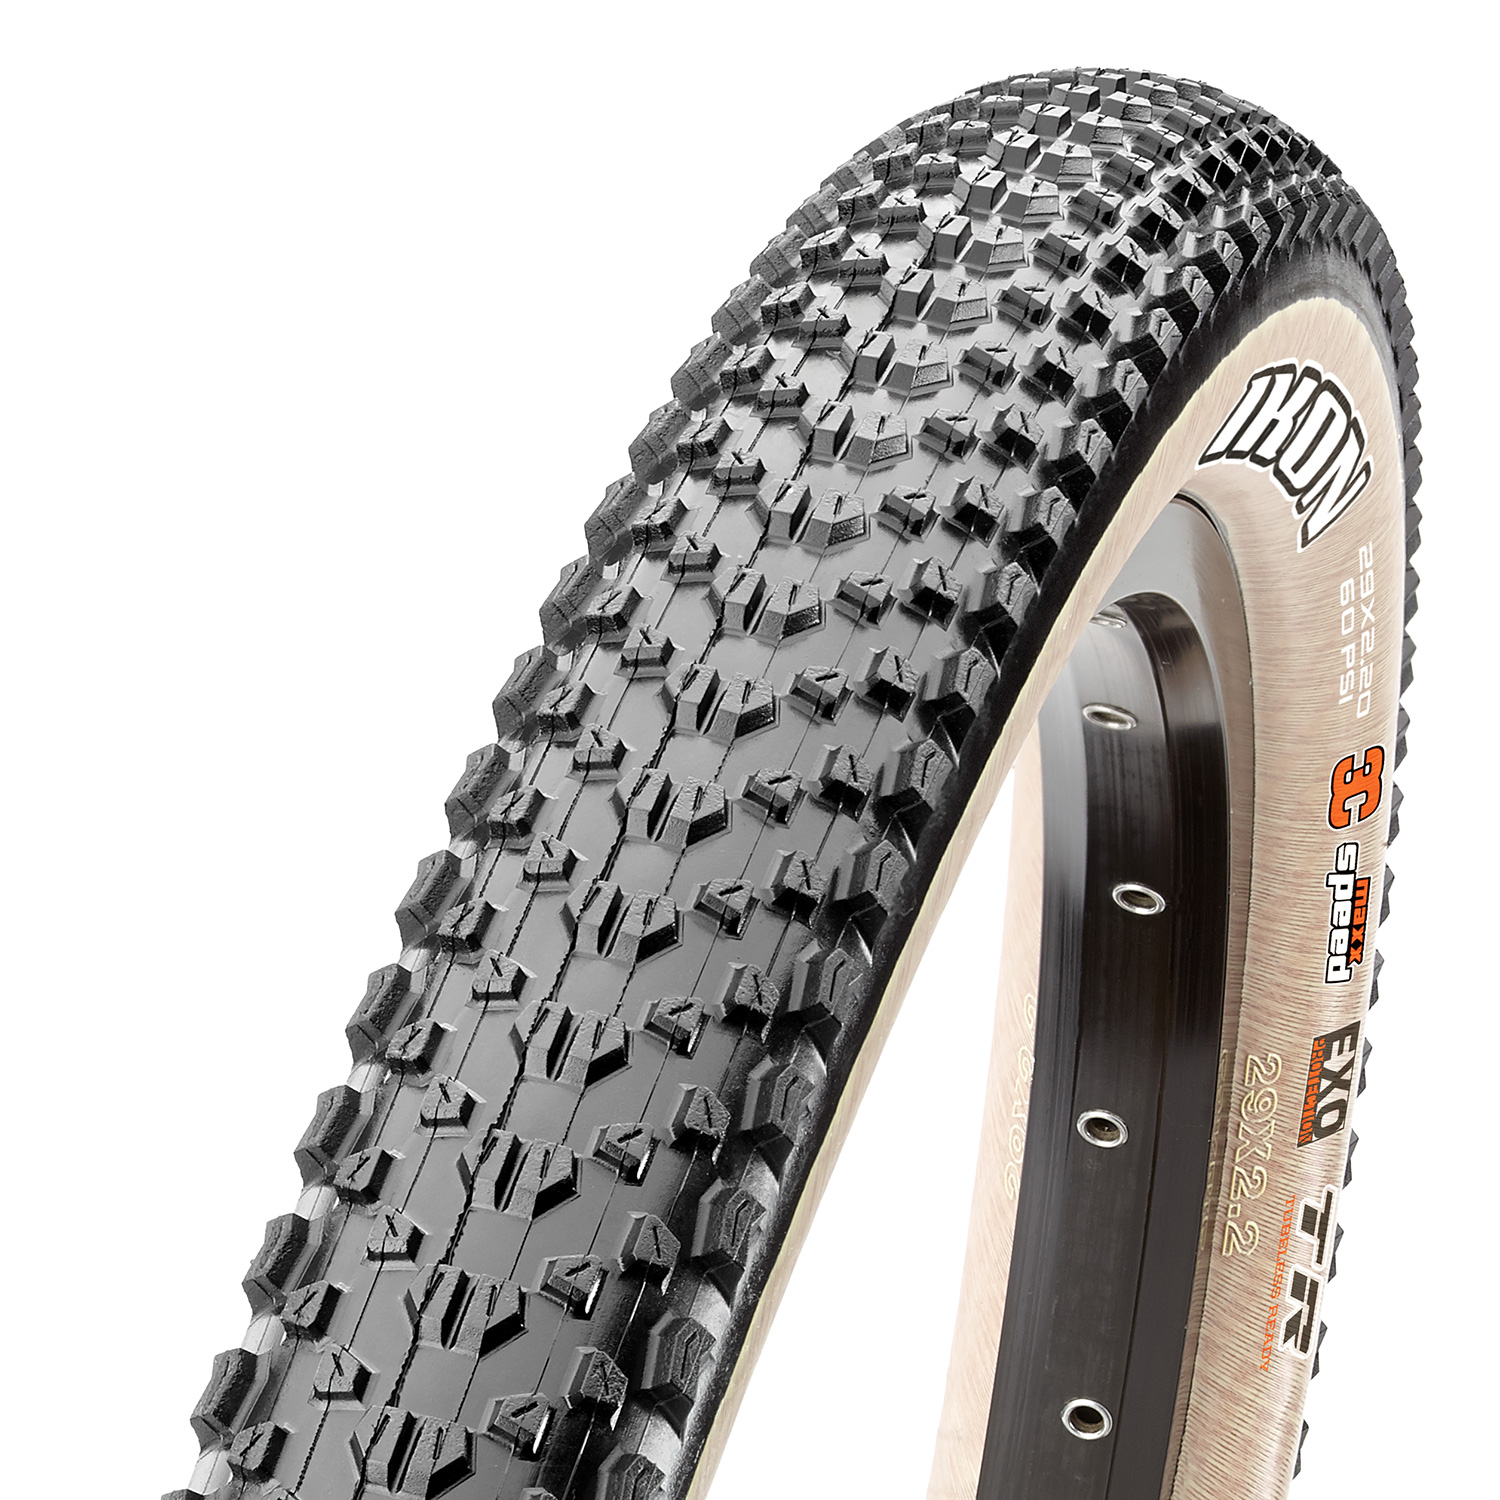 Ikon Tyres | Off-Road Cycle Tyres | Cycle Tyres | Maxxis Tyres UK